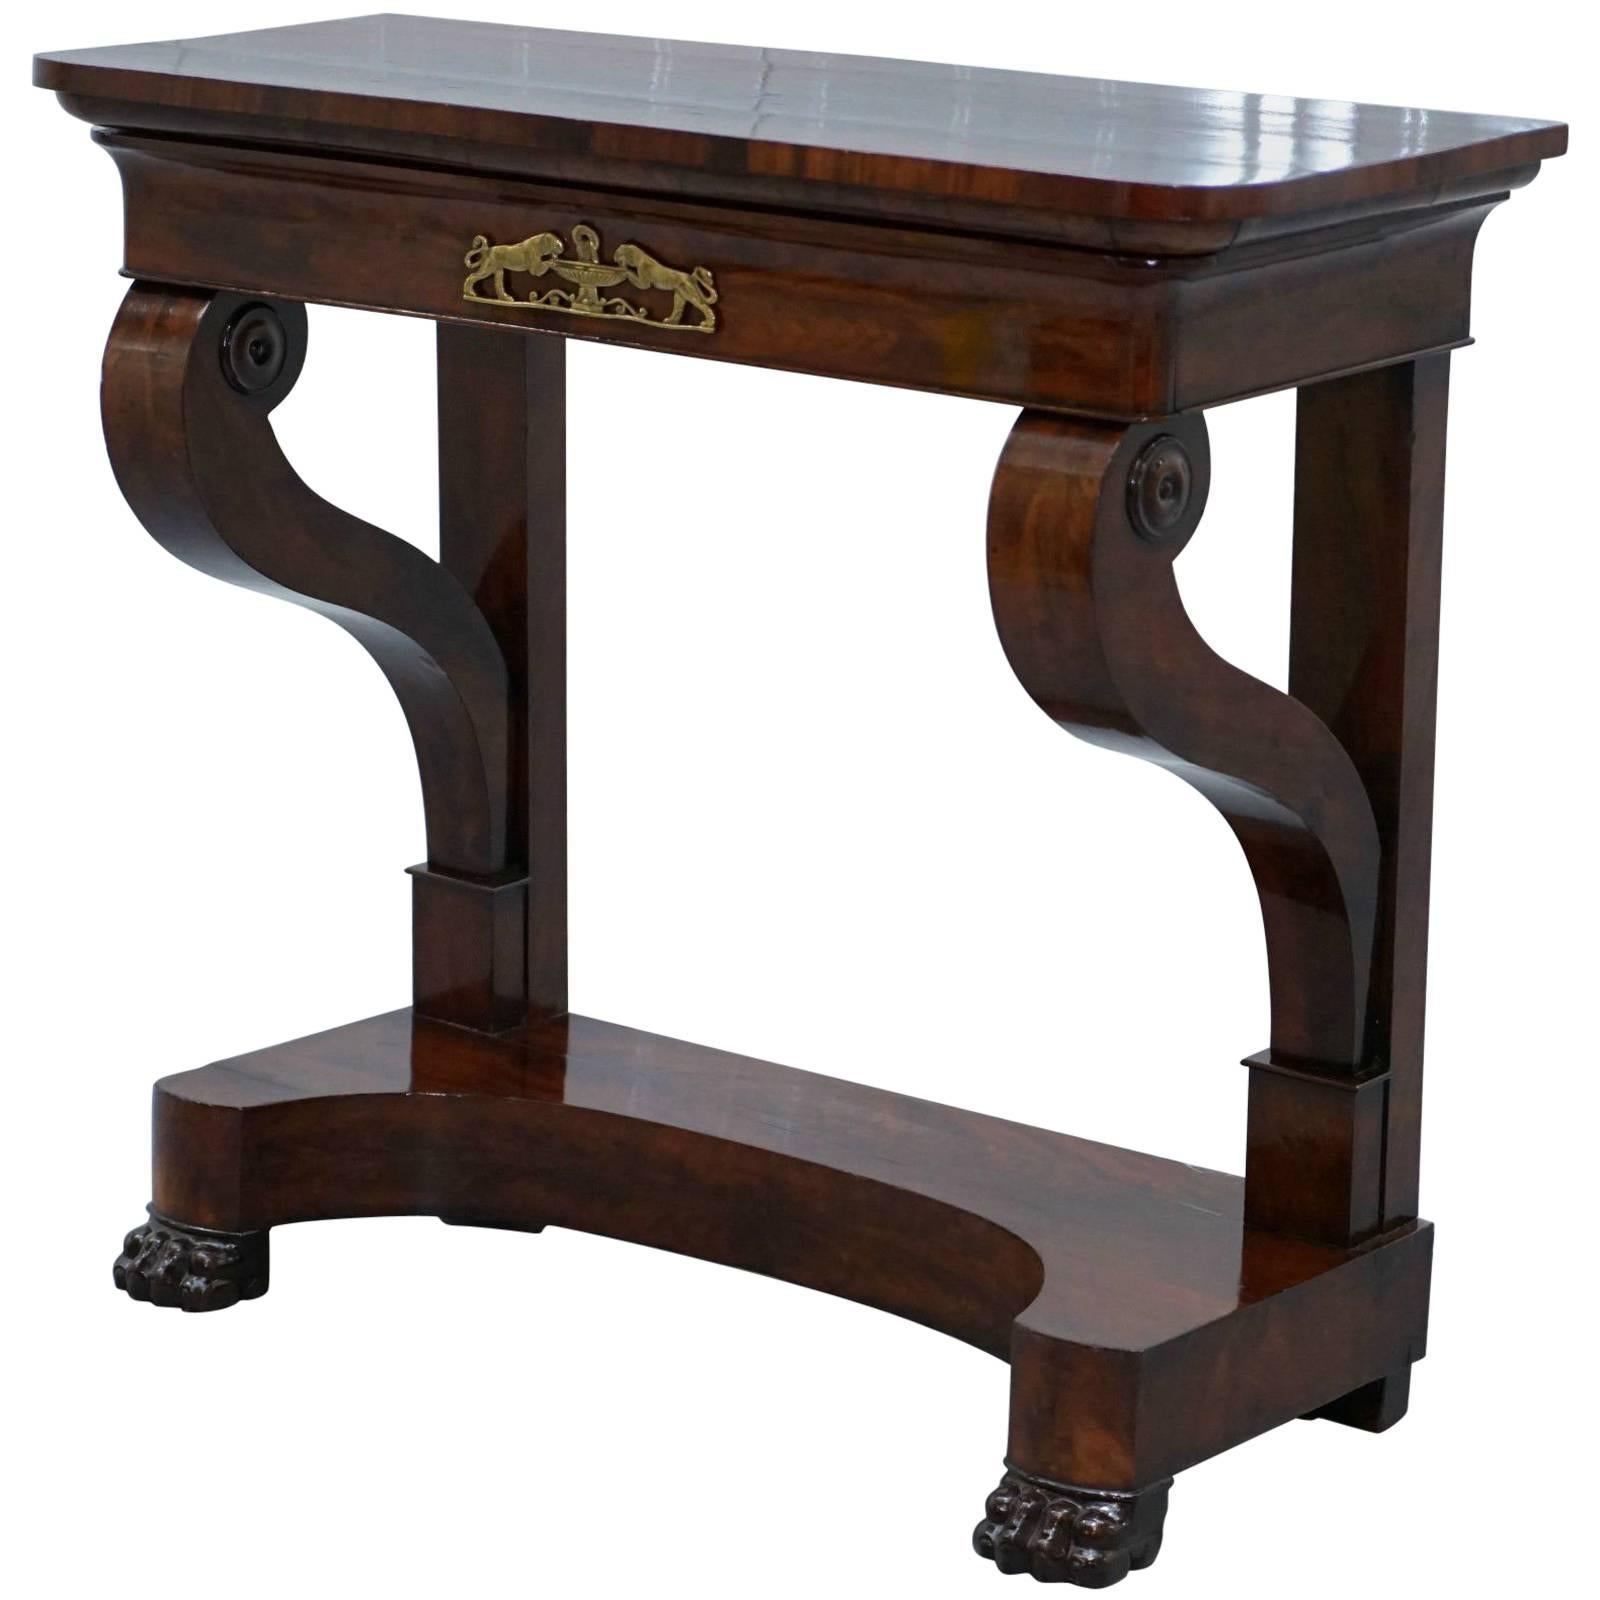 Restored Original Stamped James Winter & Sons circa 1840 Mahogany Console Table